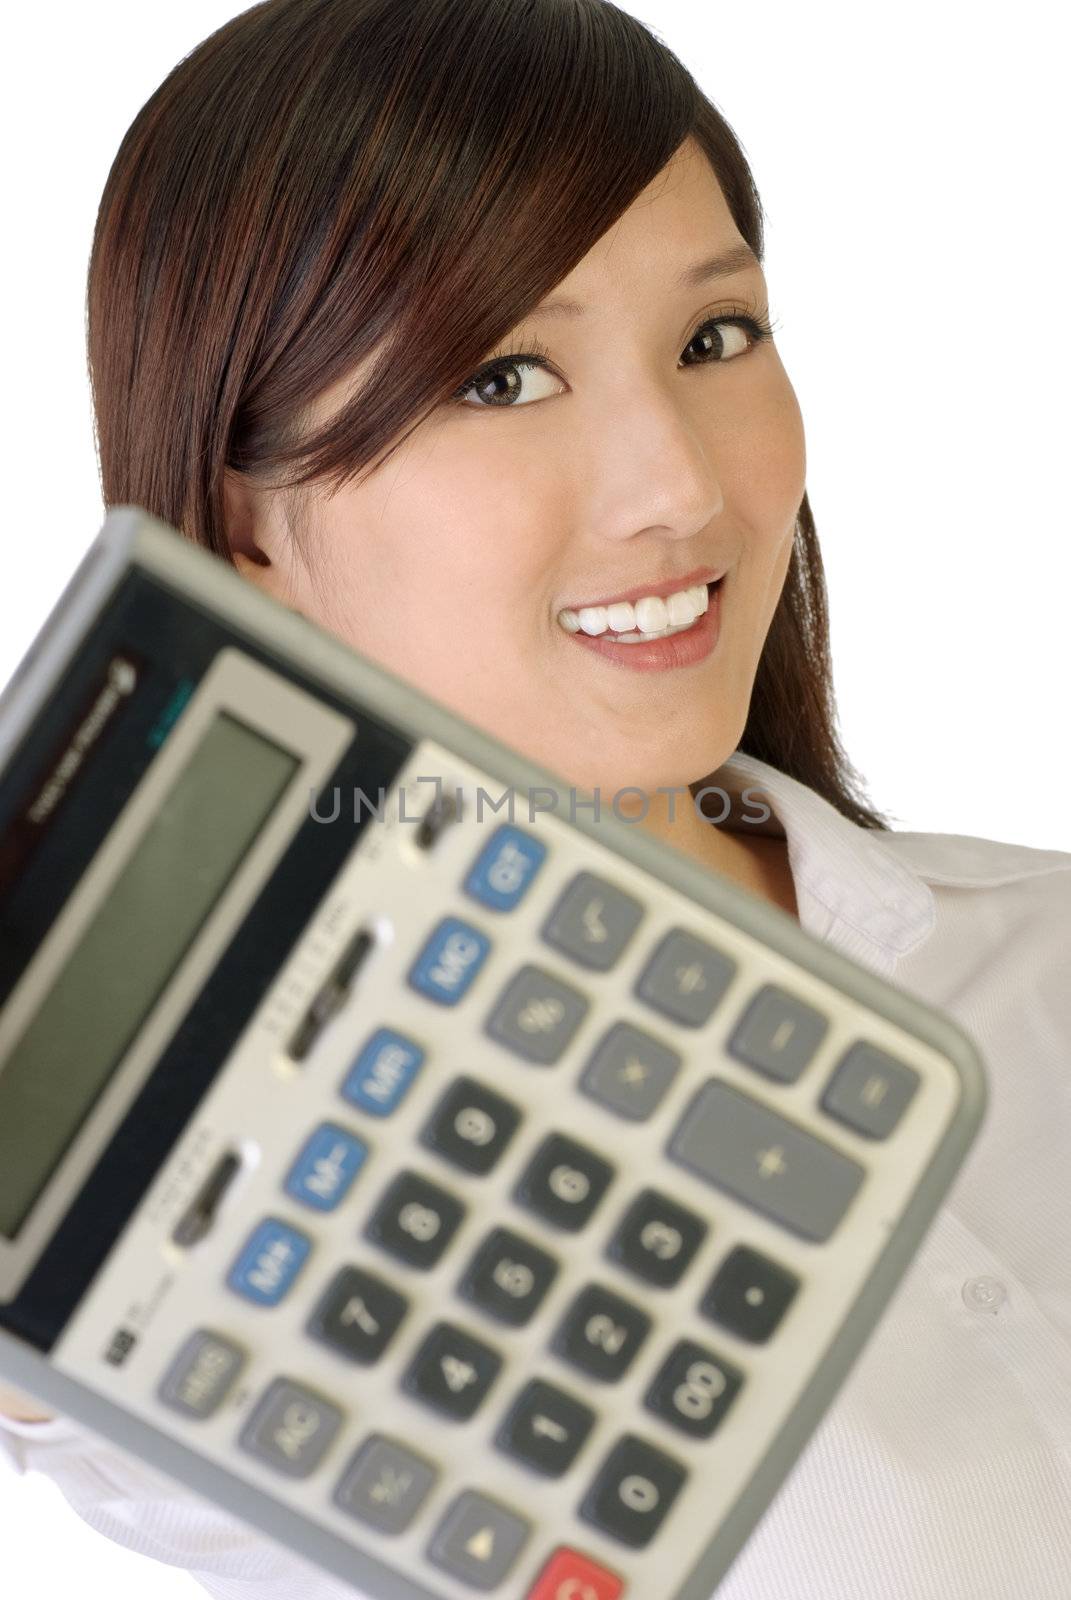 Calculator with business woman portrait on white background.